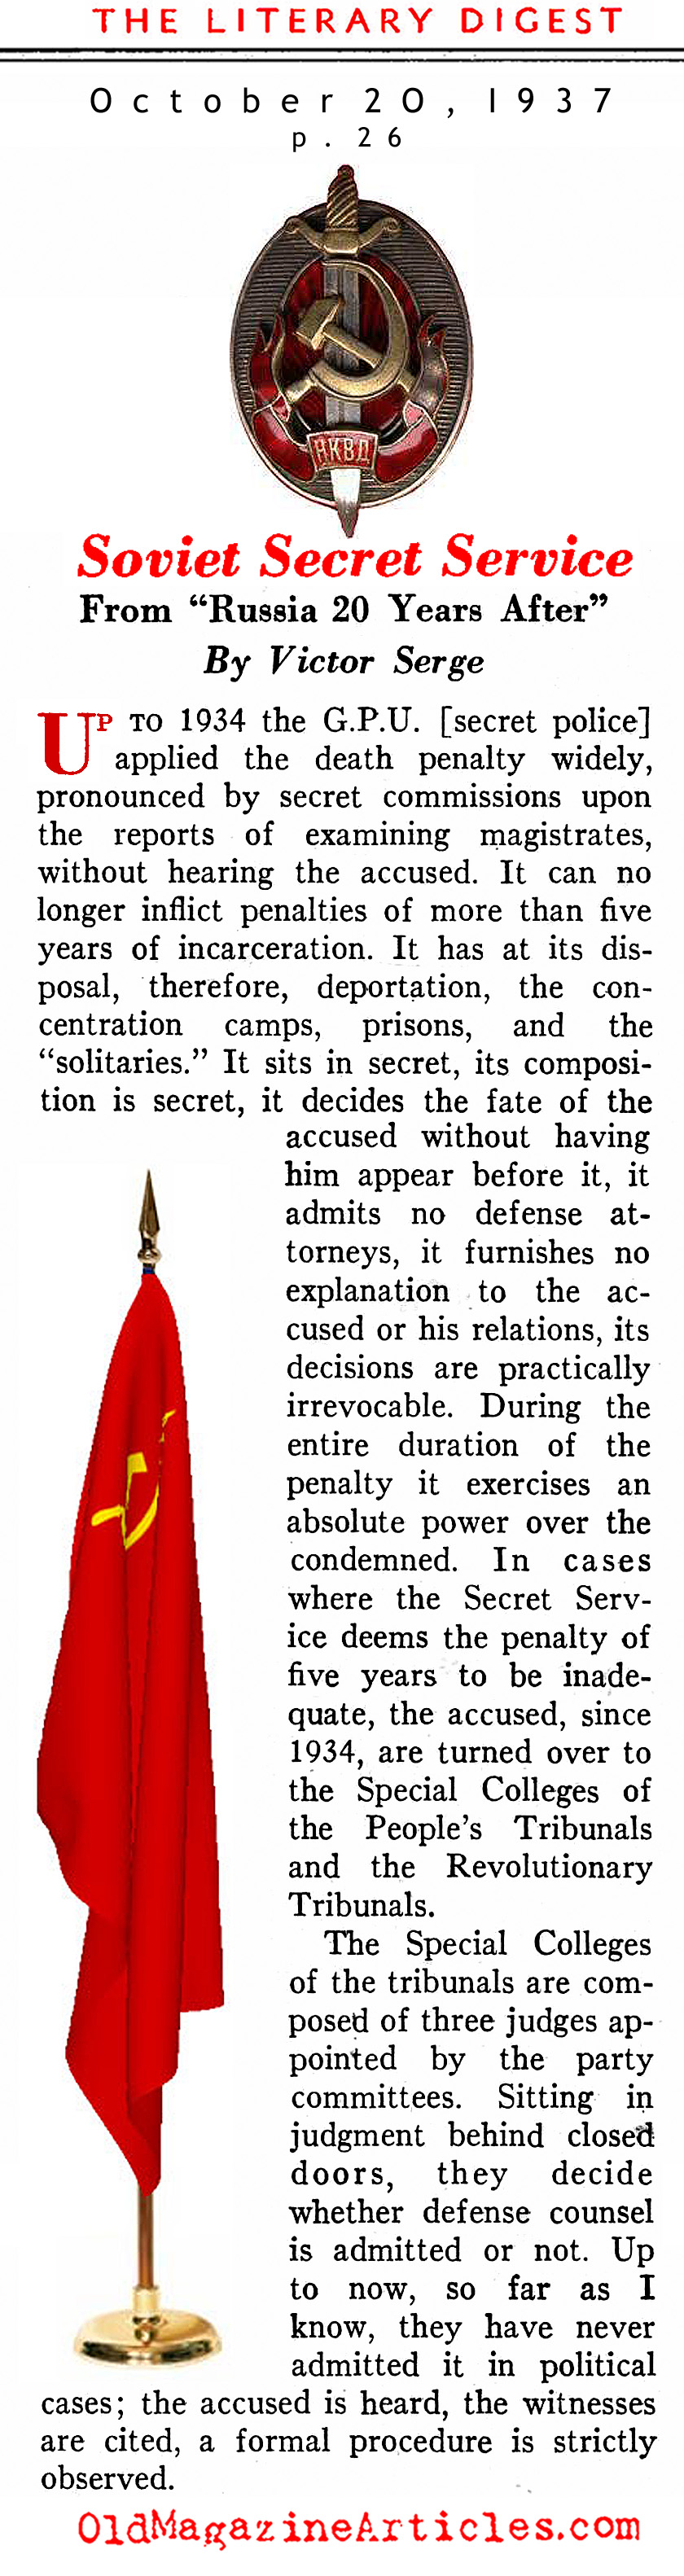 The Police State (Literary Digest, 1937)